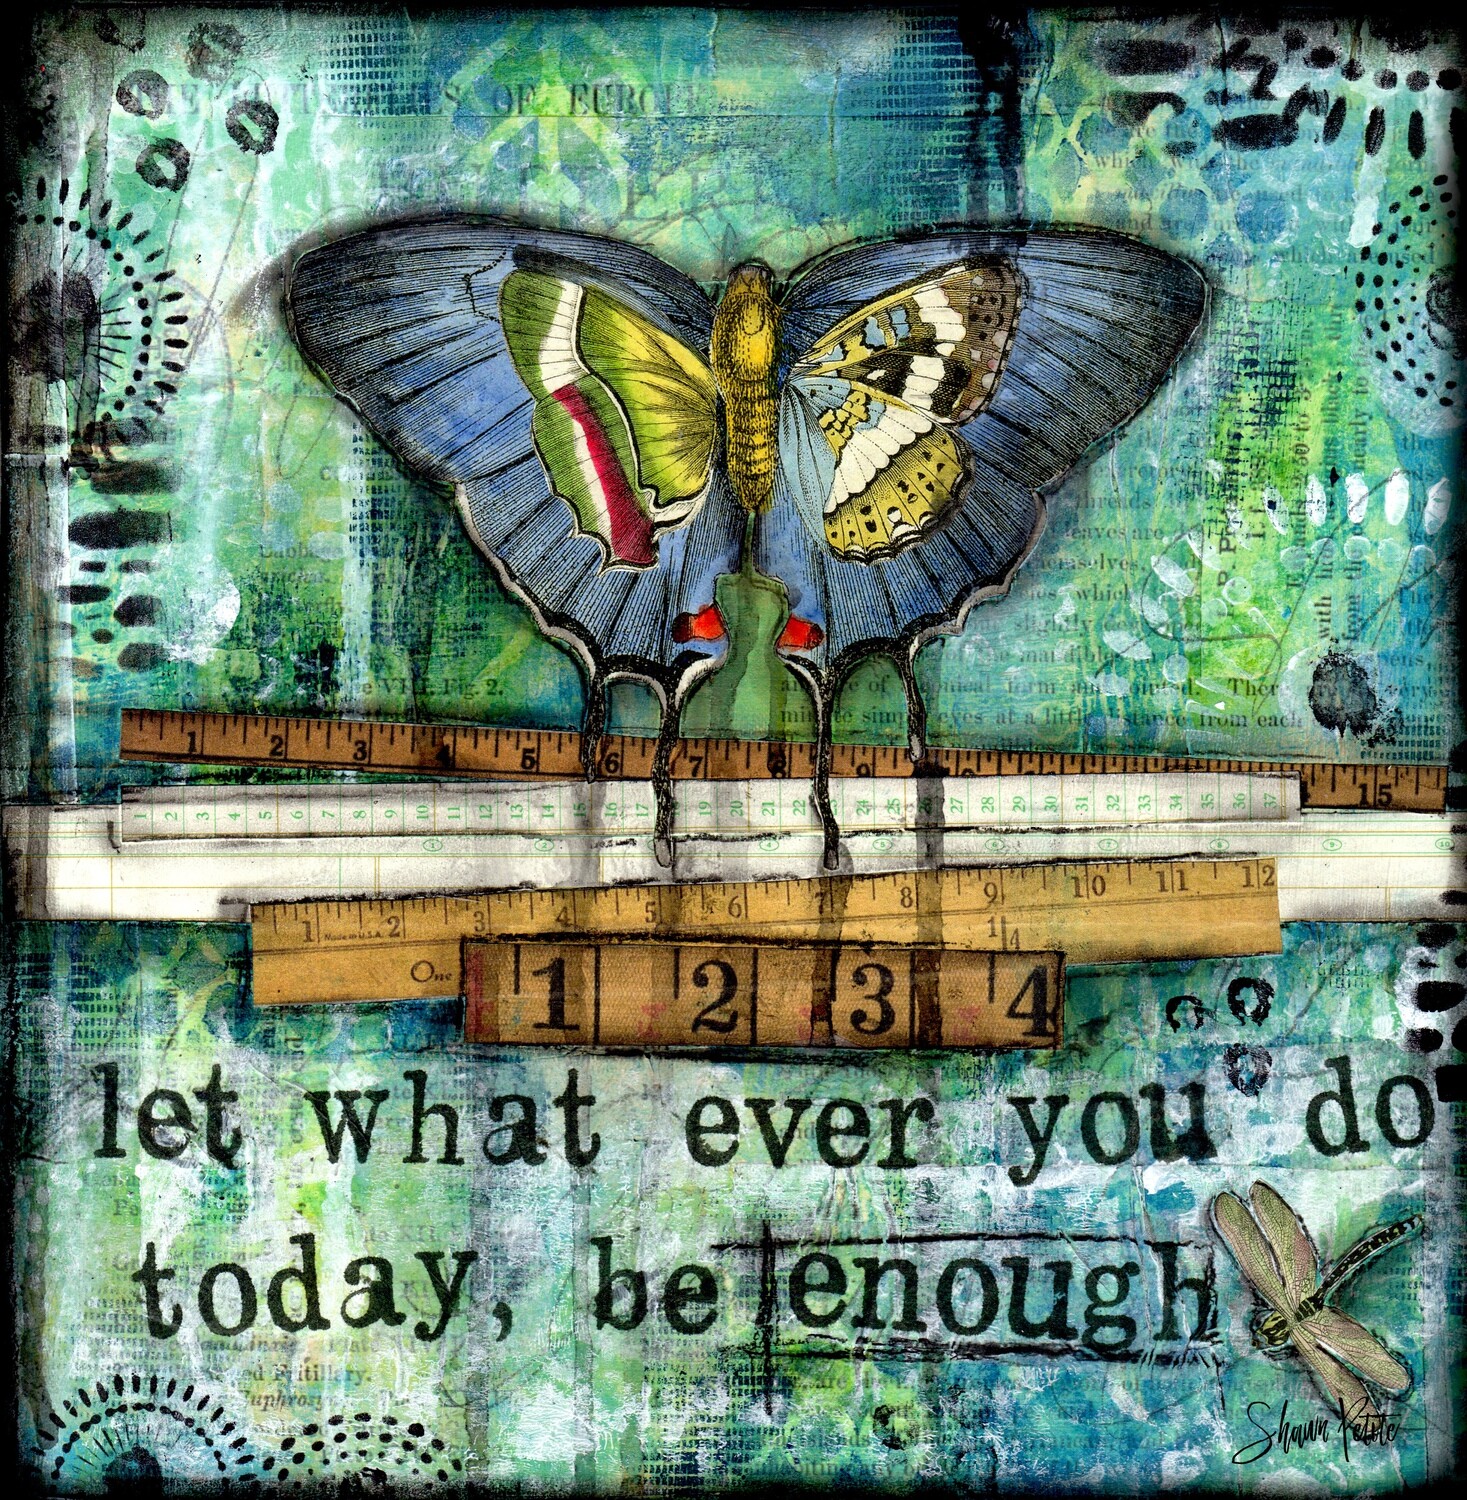 "Let Whatever You Do Be Enough" Print on Wood 6x6 Overstock